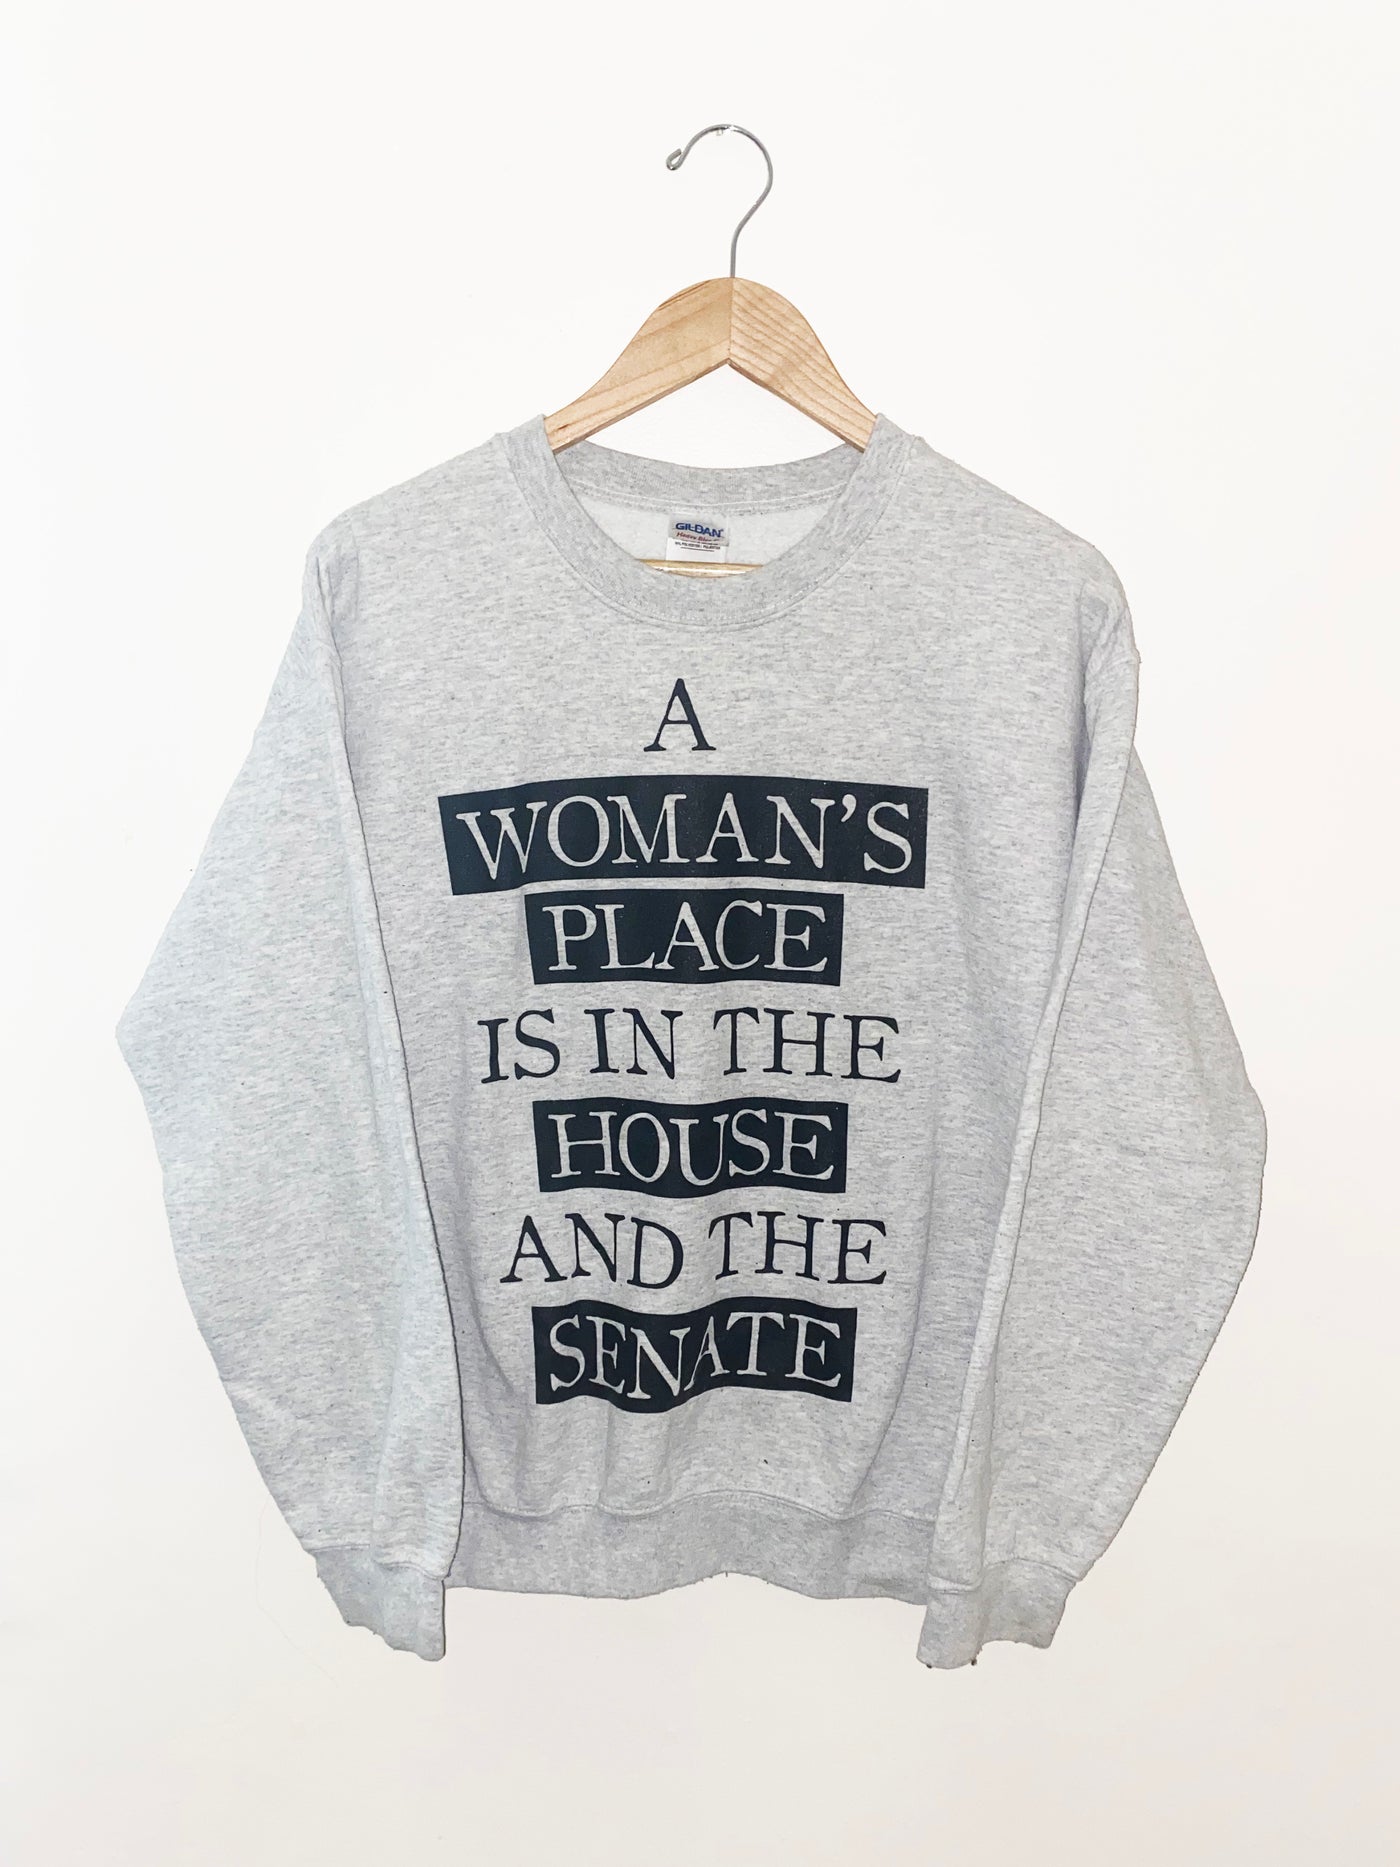 Vintage “A Woman’s Place is in the House and the Senate” Crewneck